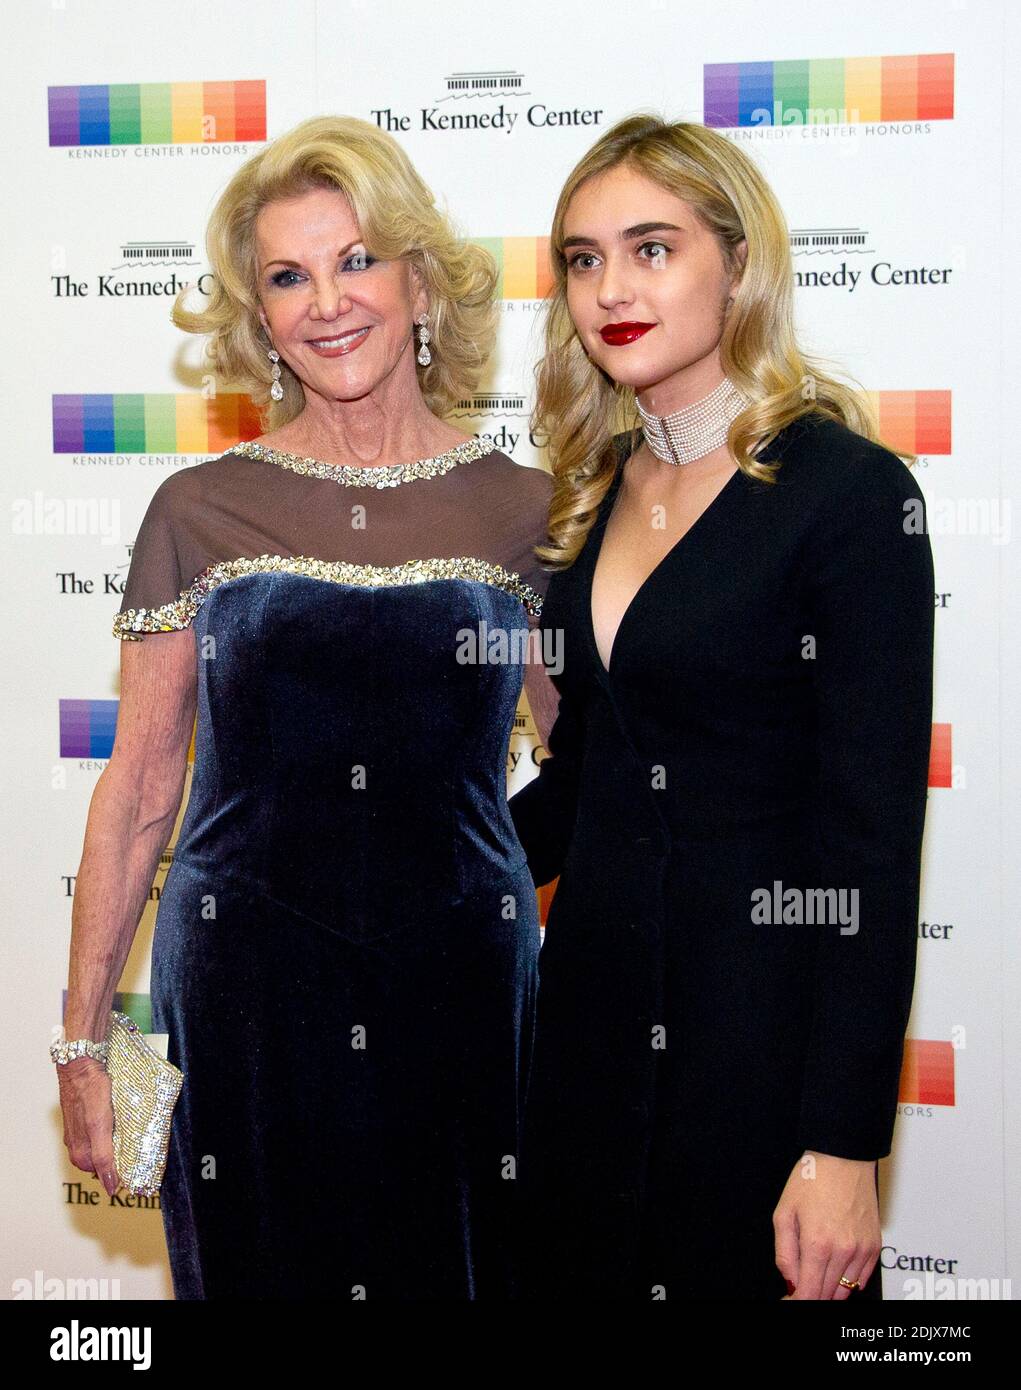 Elaine Wynn, left, and guest arrive for the formal Artist's Dinner honoring the recipients of the 39th Annual Kennedy Center Honors hosted by United States Secretary of State John F. Kerry at the U.S. Department of State in Washington, D.C. on Saturday, December 3, 2016. The 2016 honorees are: Argentine pianist Martha Argerich; rock band the Eagles; screen and stage actor Al Pacino; gospel and blues singer Mavis Staples; and musician James Taylor. Photo by Ron Sachs /Pool via CNP/ABACAPRESS.COM Stock Photo